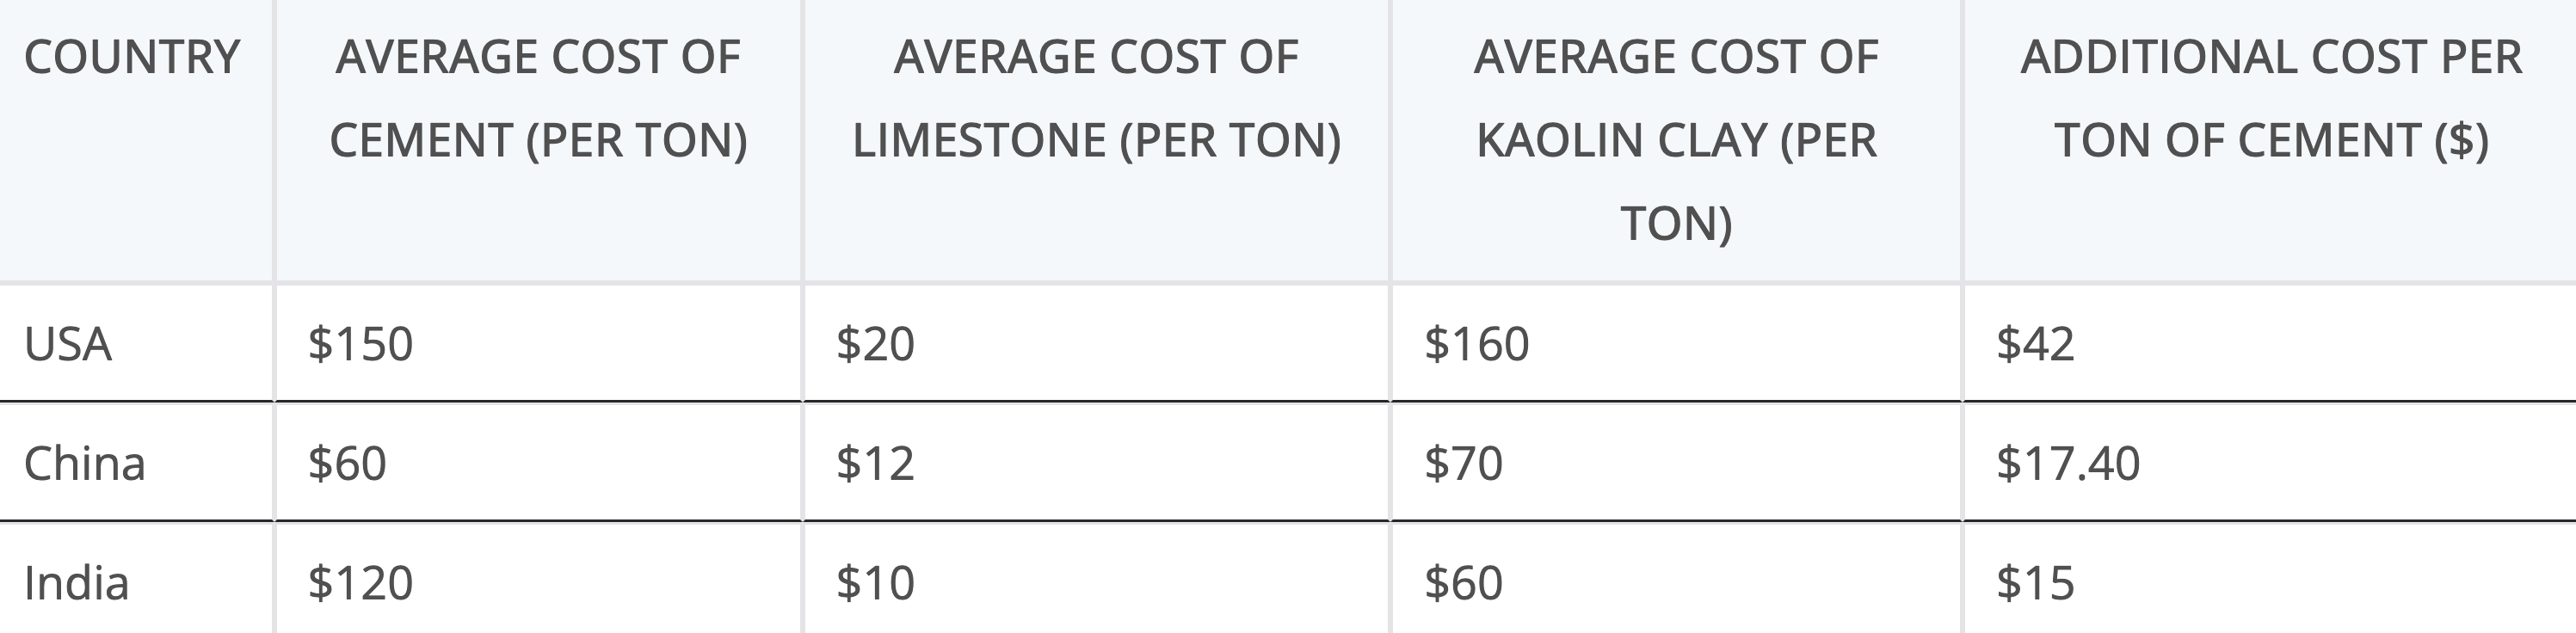 Additional cost of kaolin clay compared to limestone in three geographies by author